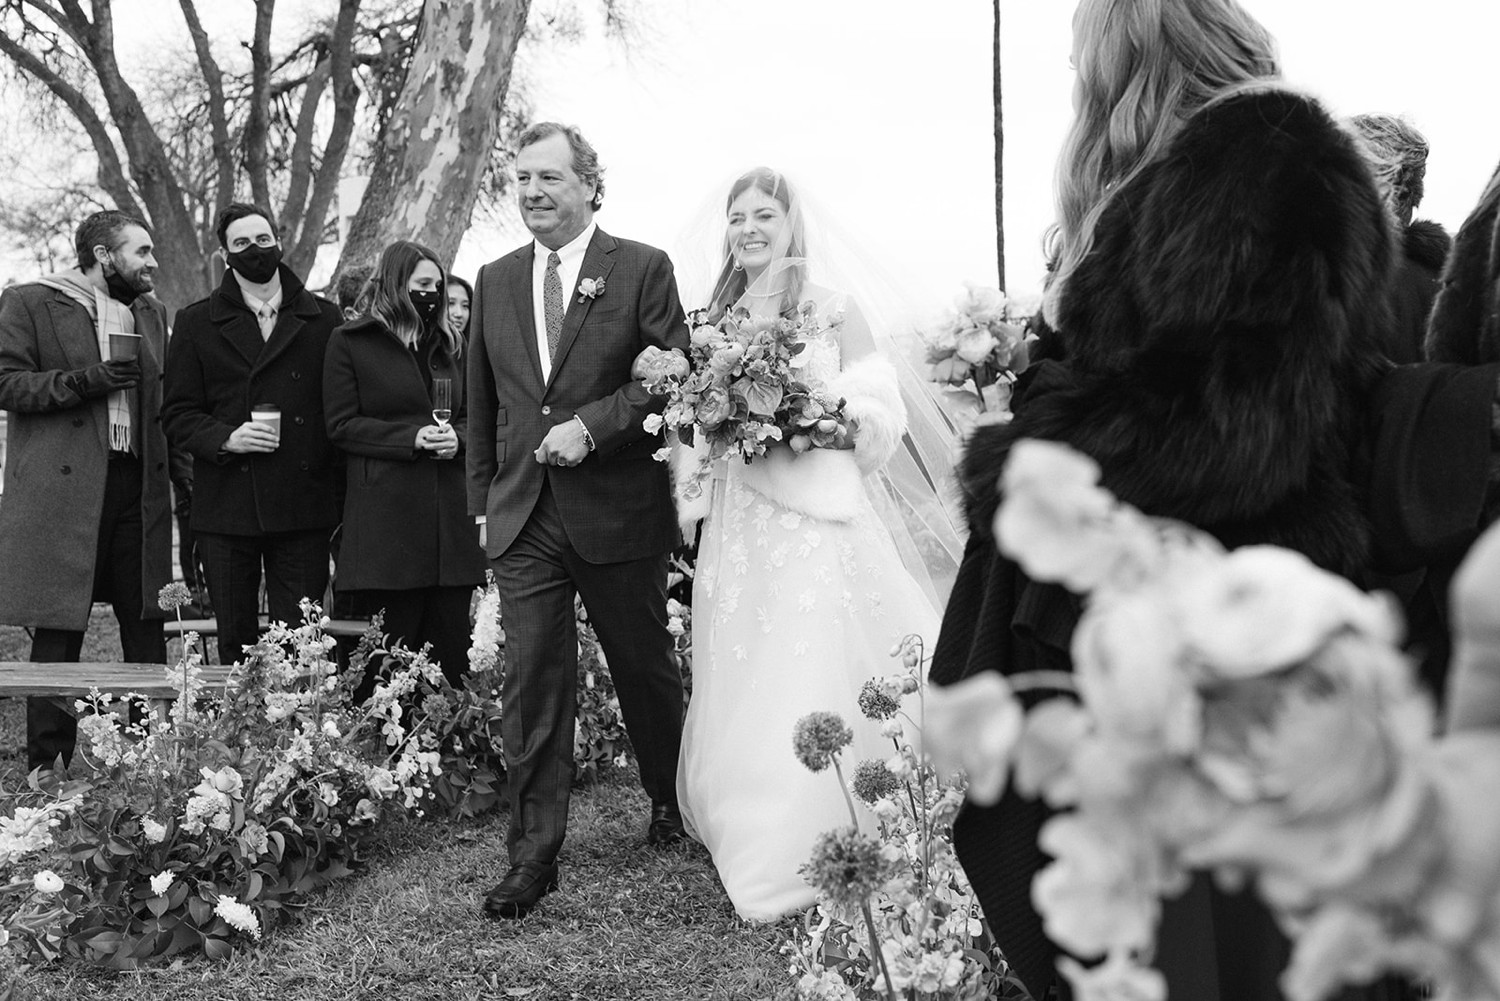 Bride walking down aisle with father